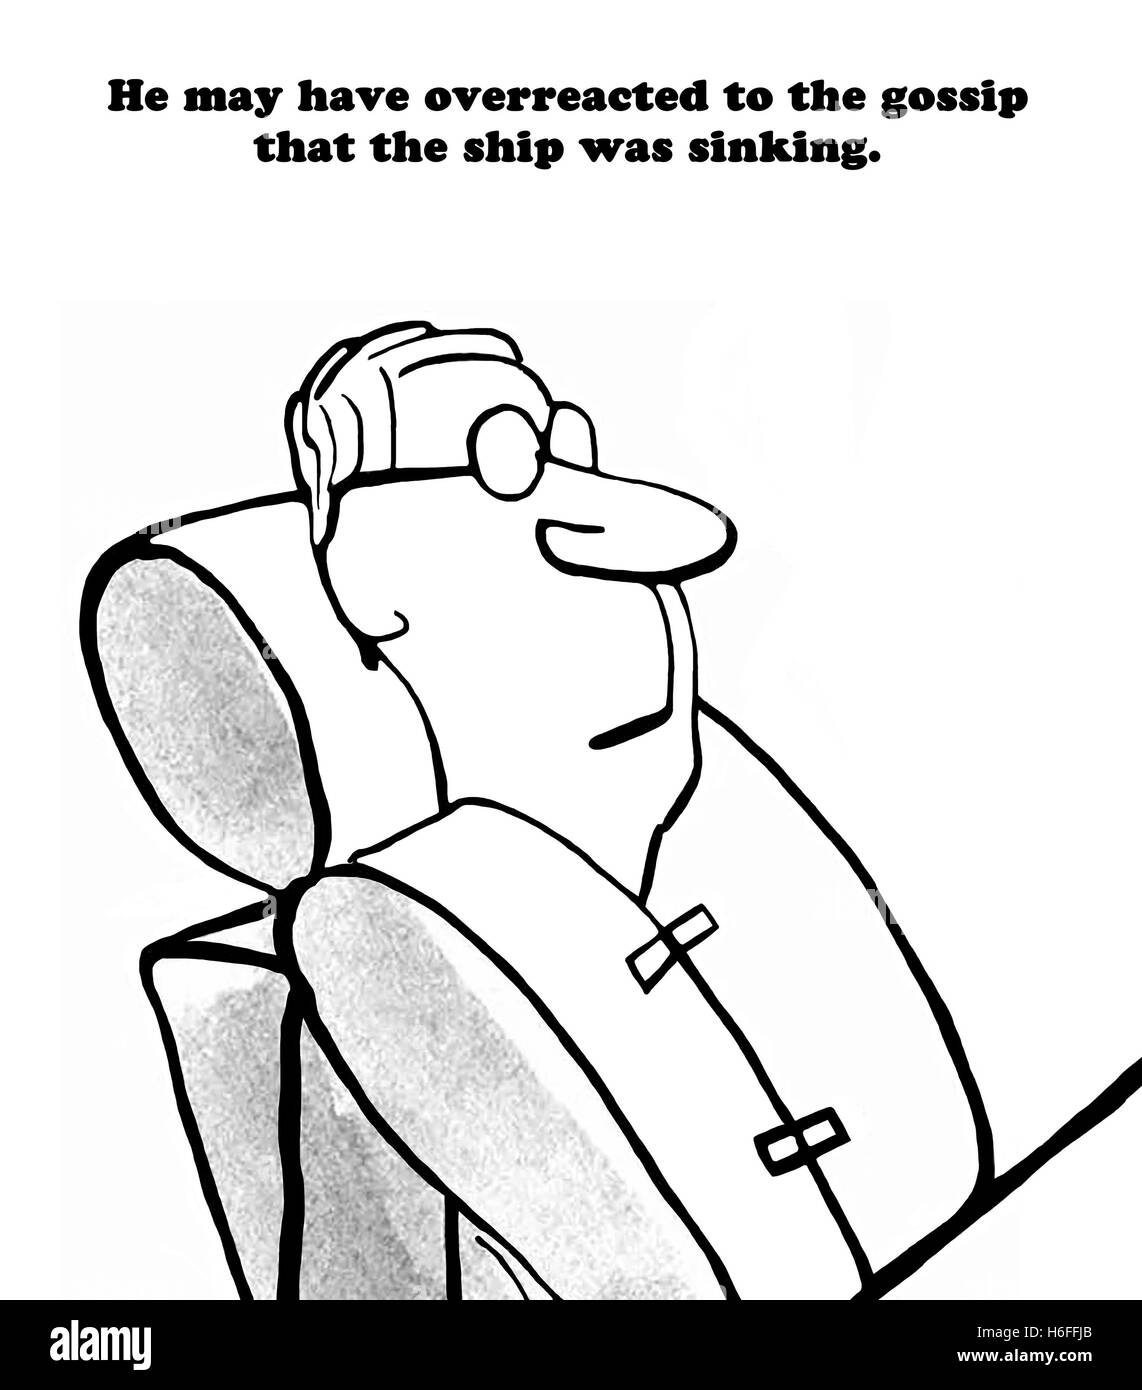 Black and white business illustration of a businessman wearing a life jacket, he may have overreacted to gossip of sinking ship. Stock Photo